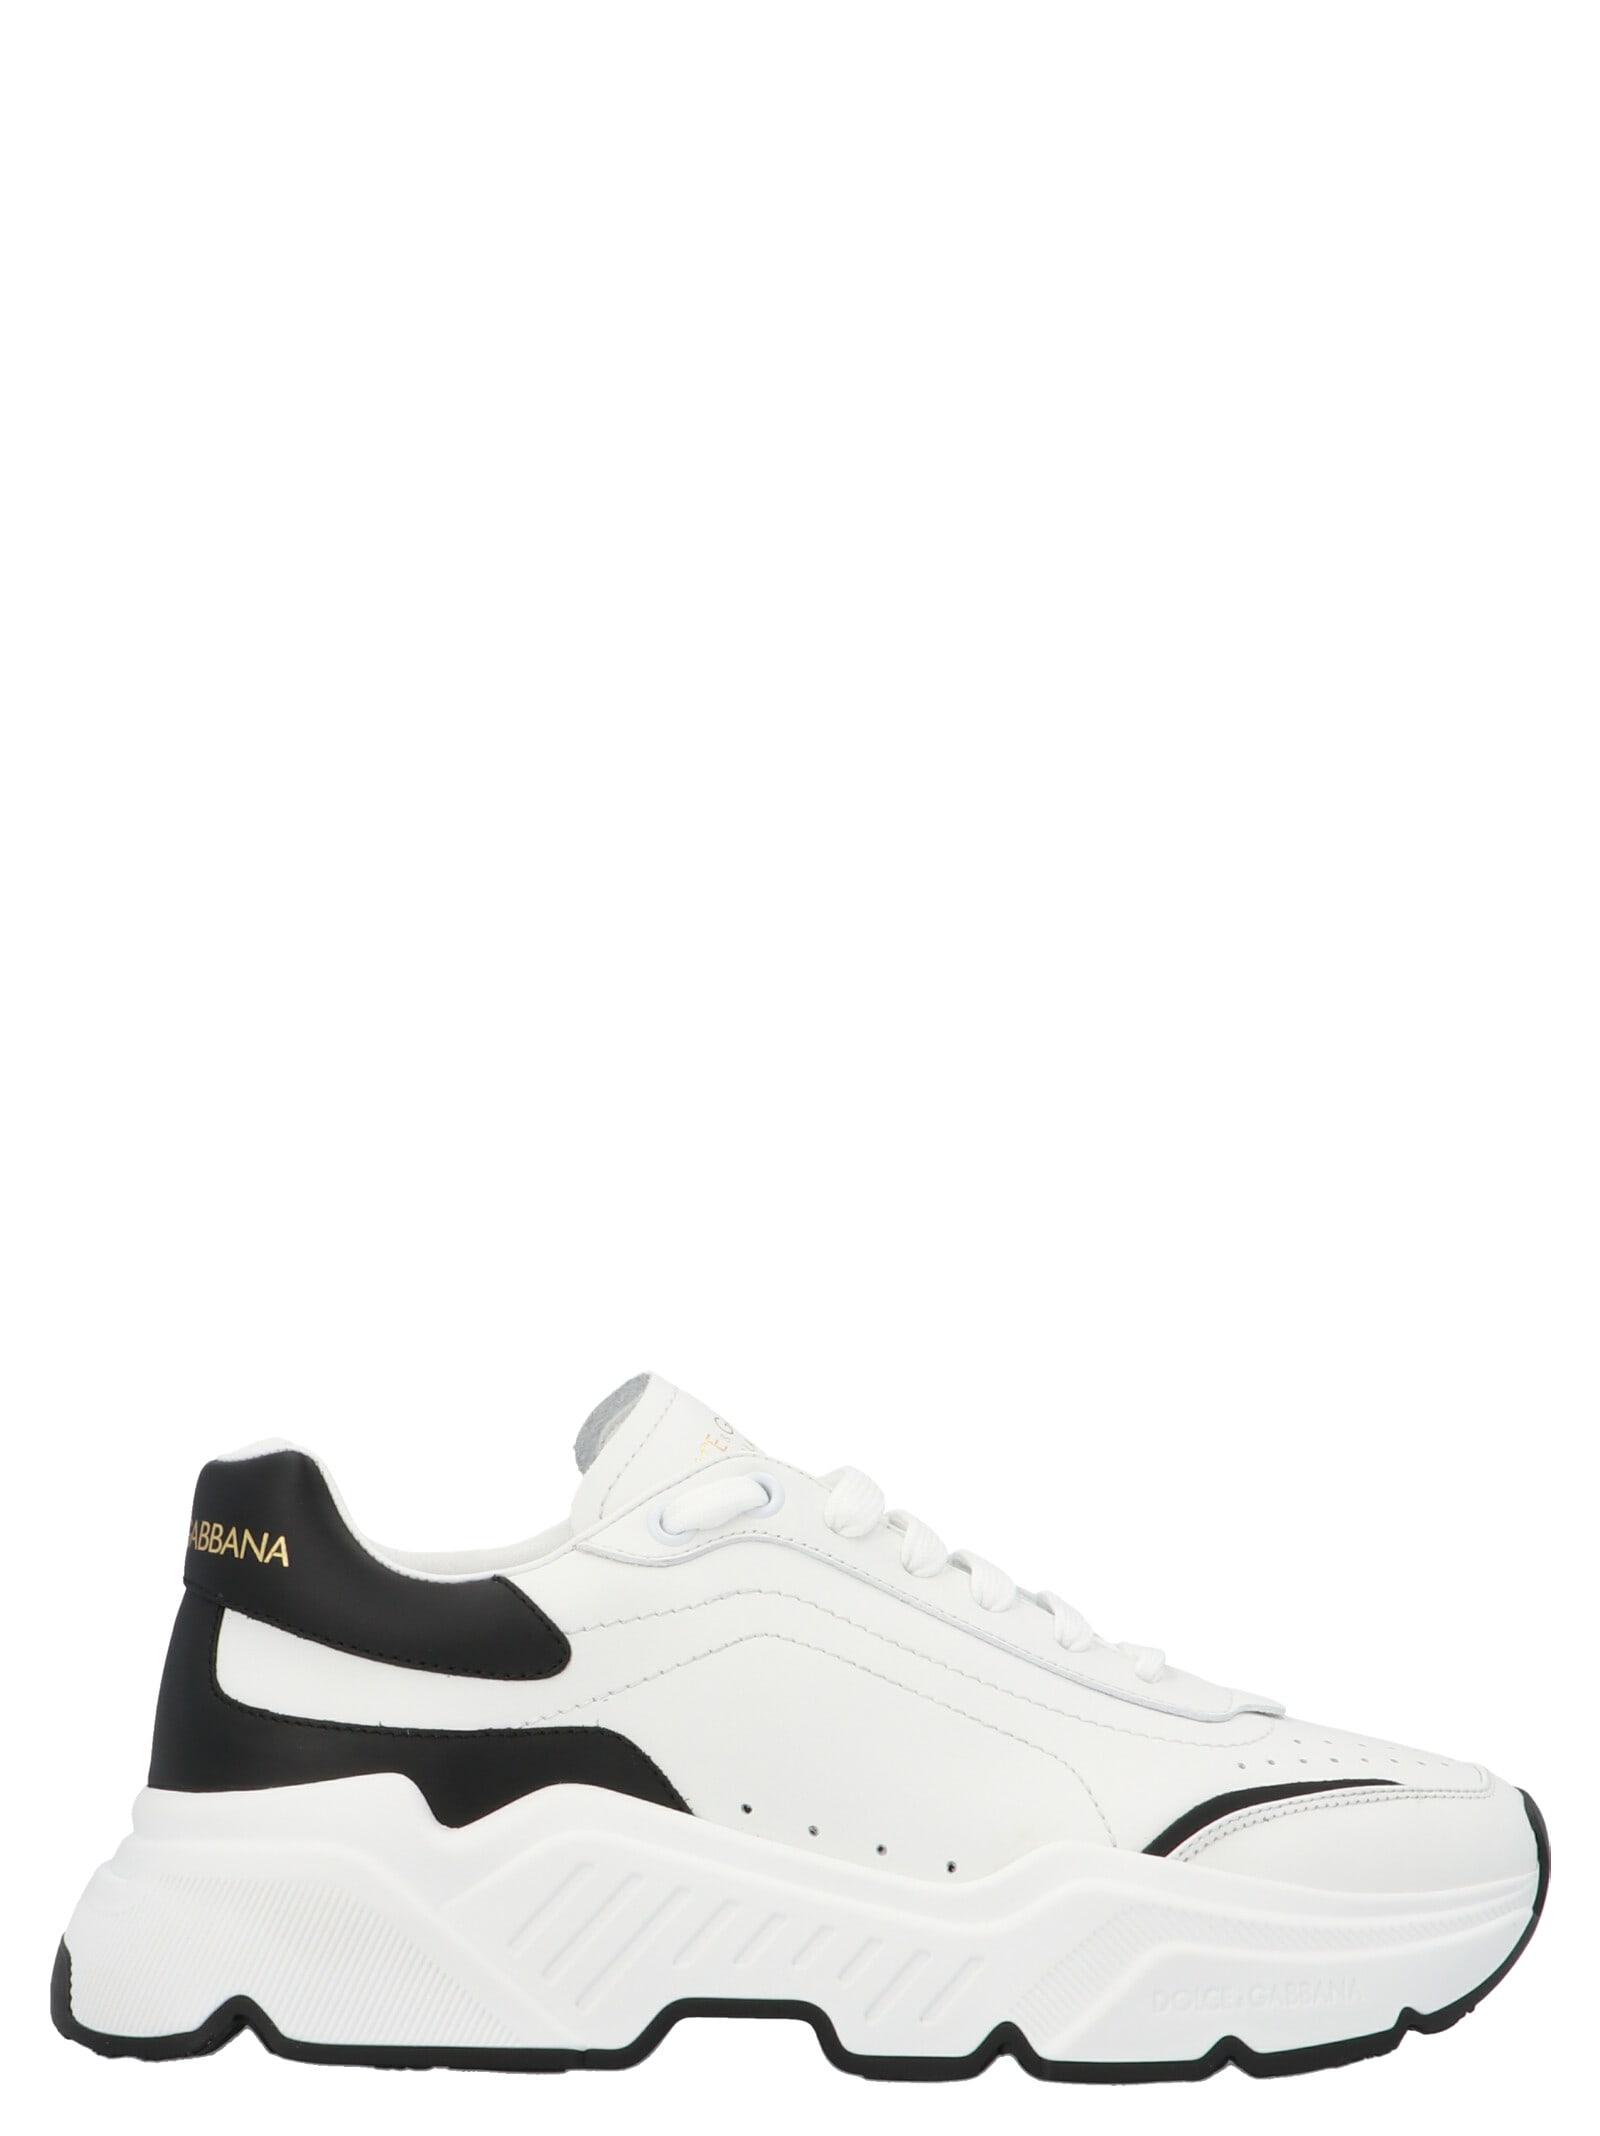 Buy Dolce & Gabbana daymaster Shoes online, shop Dolce & Gabbana shoes with free shipping